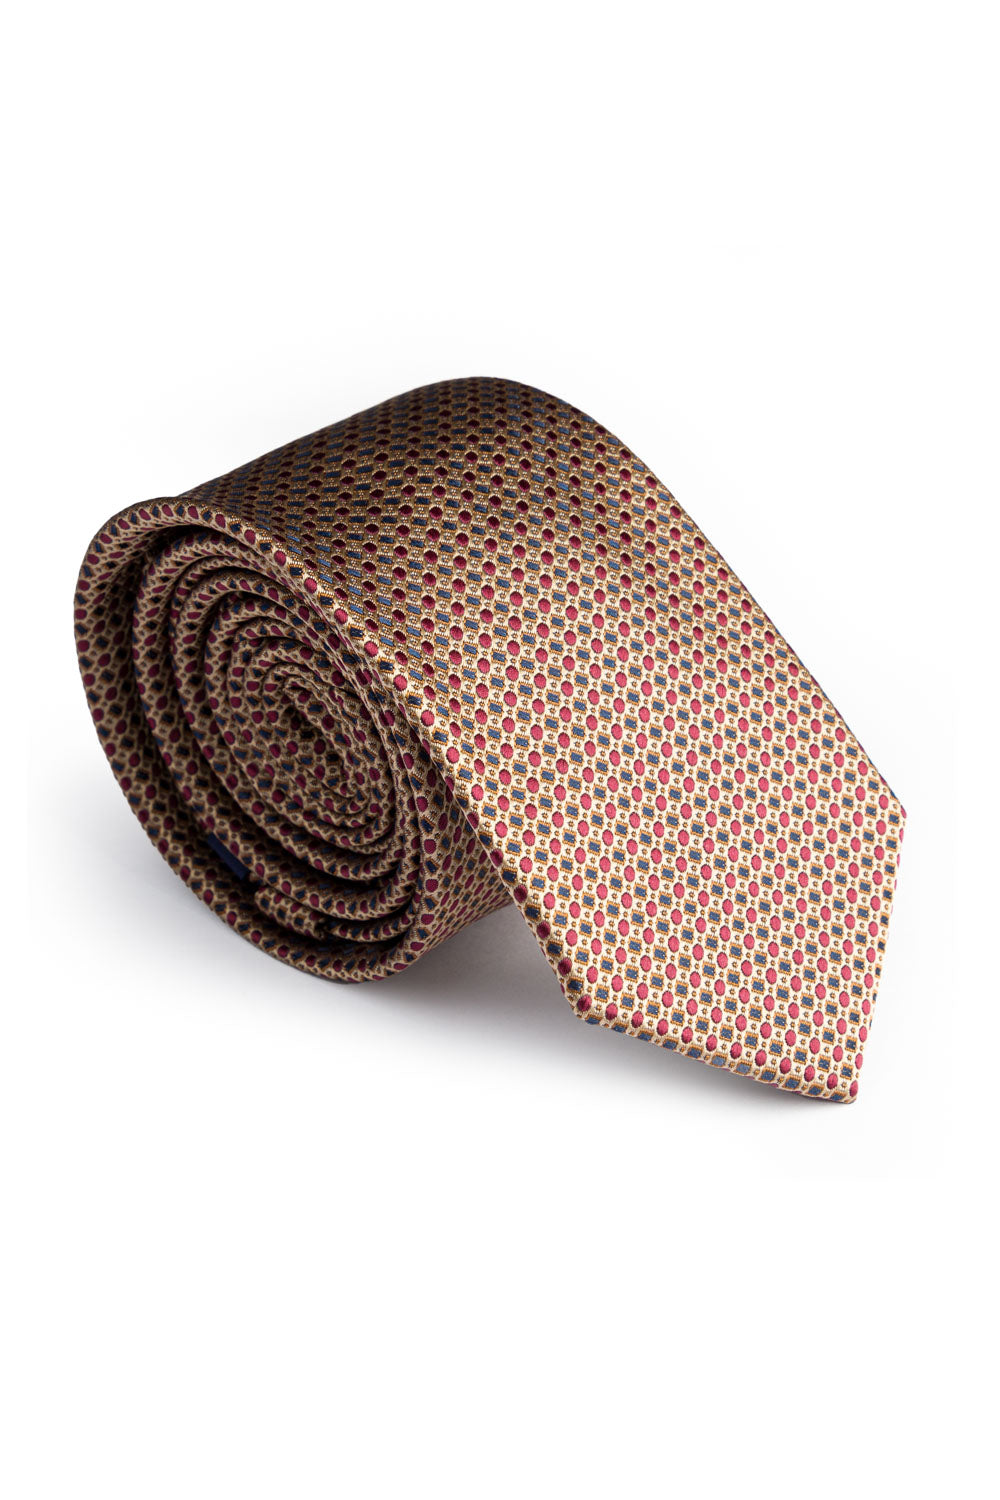 RT Dotted Tie